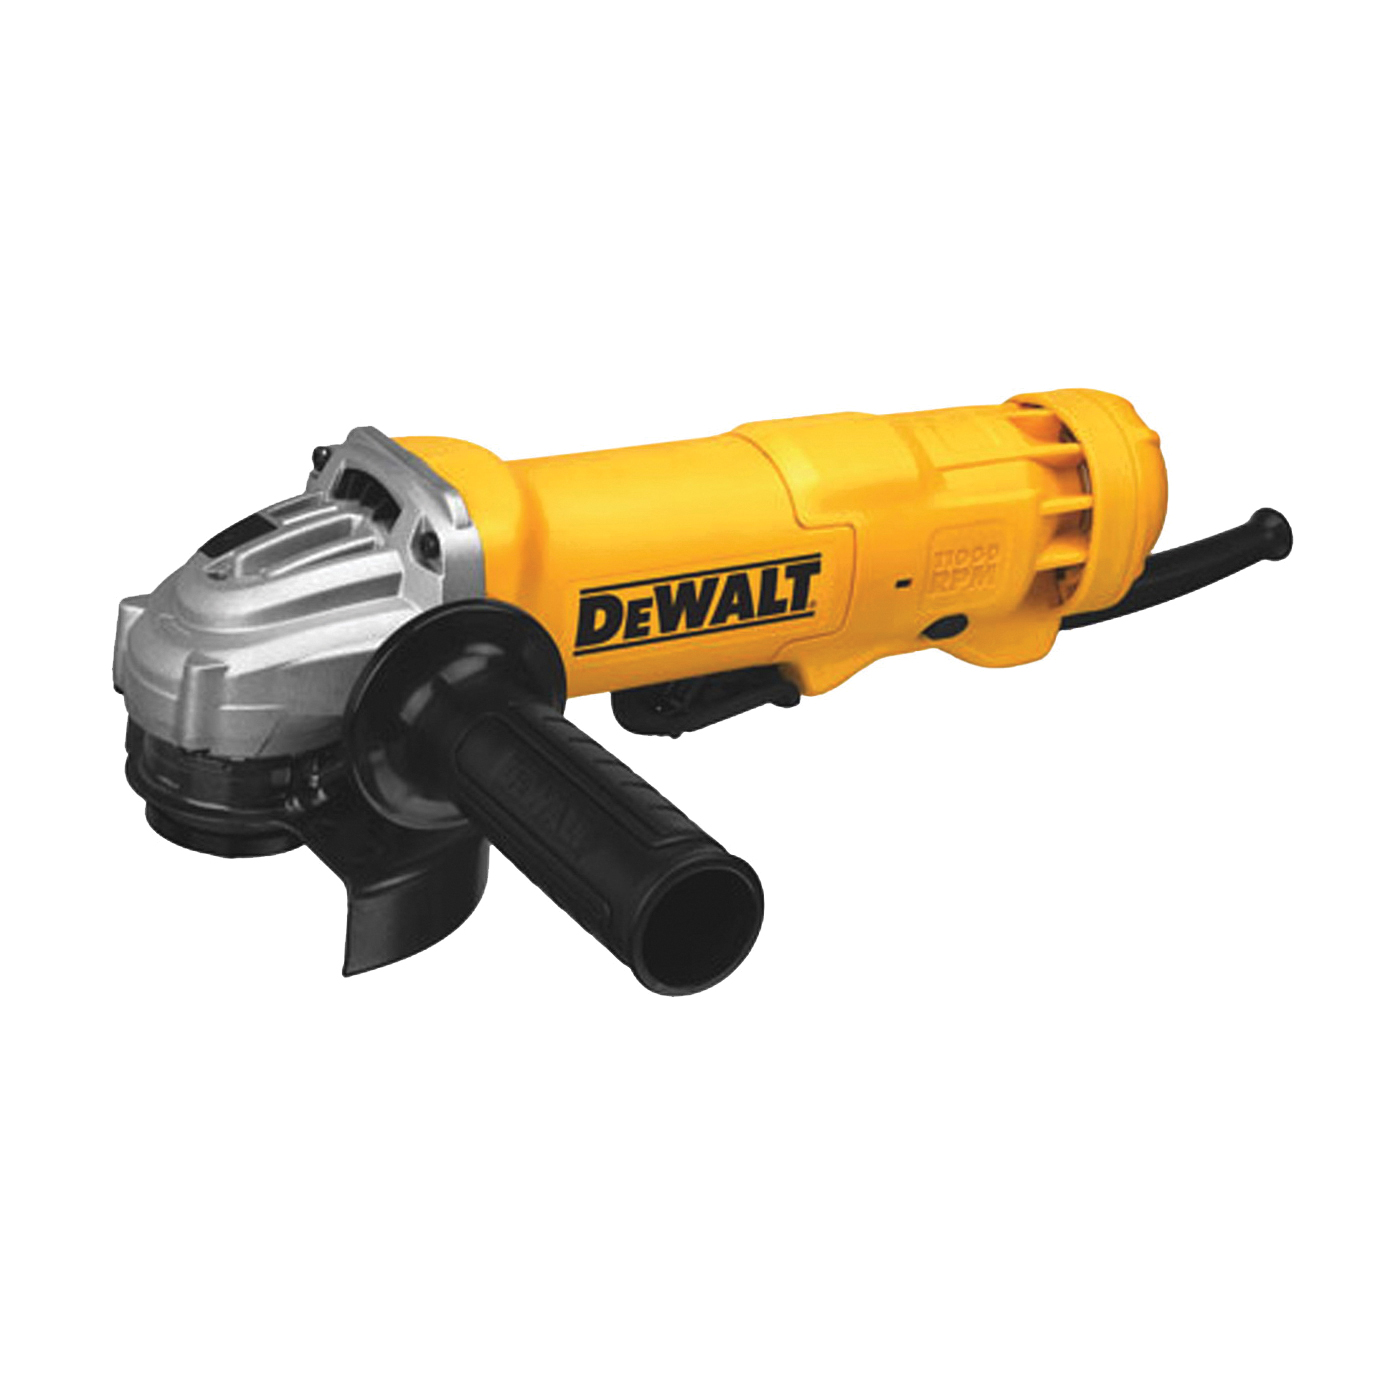 DeWALT DWE402 Small Angle Grinder, 11 A, 5/8-11 Spindle, 4-1/2 in Dia Wheel, 11,000 rpm Speed